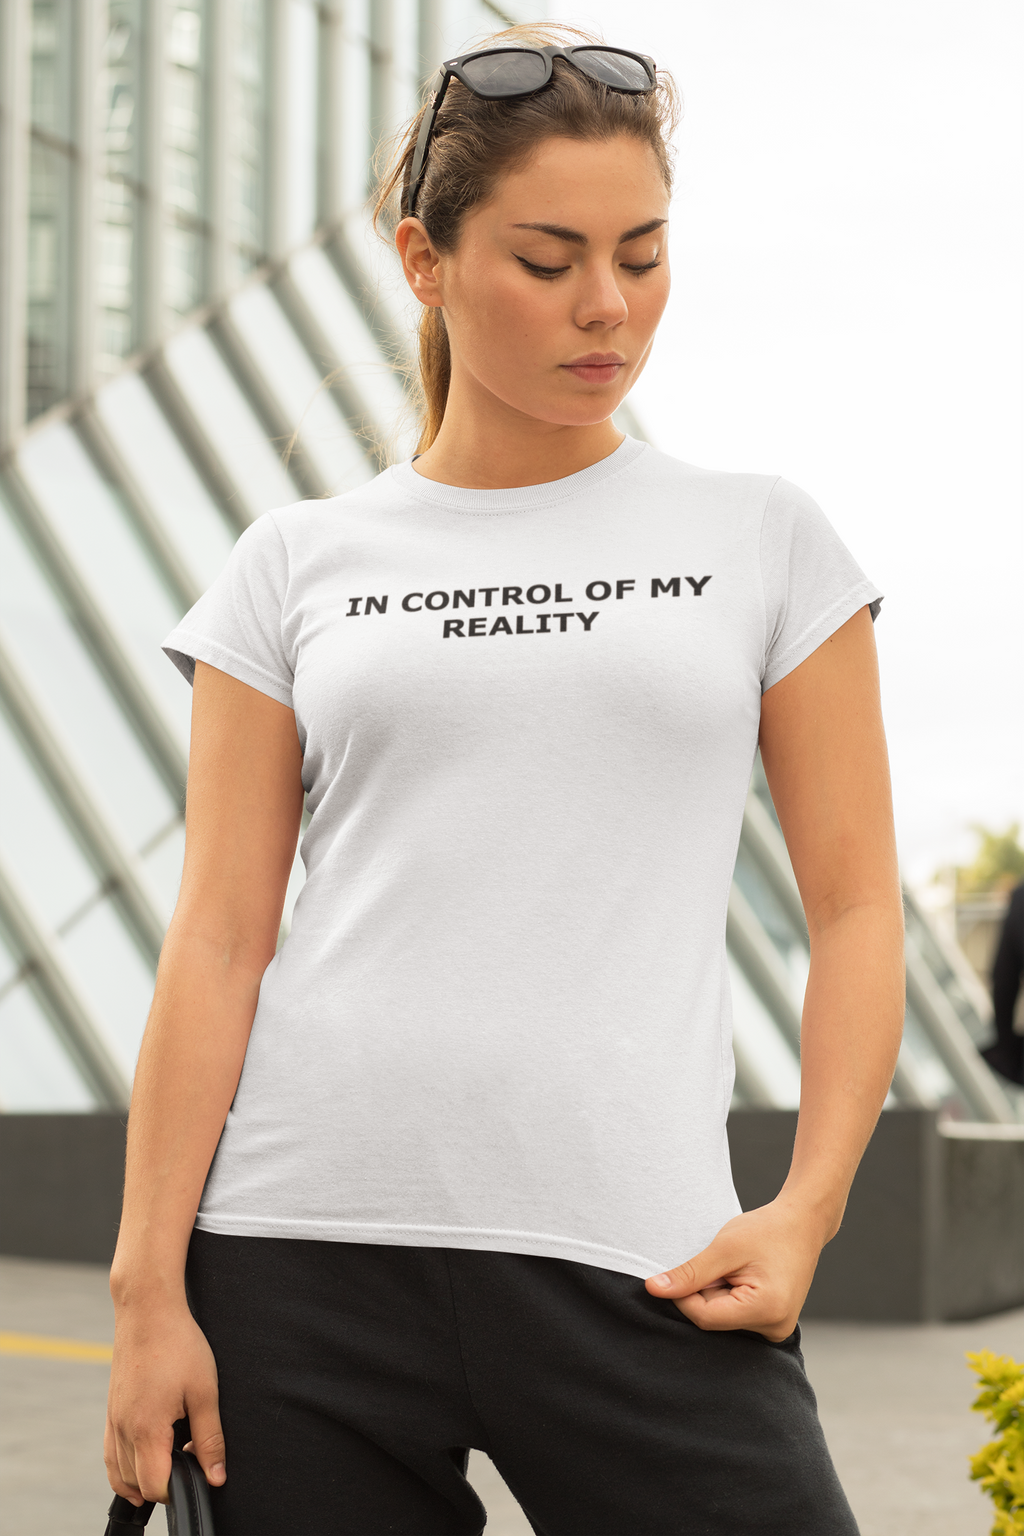 In Control Of My Reality - Basic White Premium Cotton T-Shirt